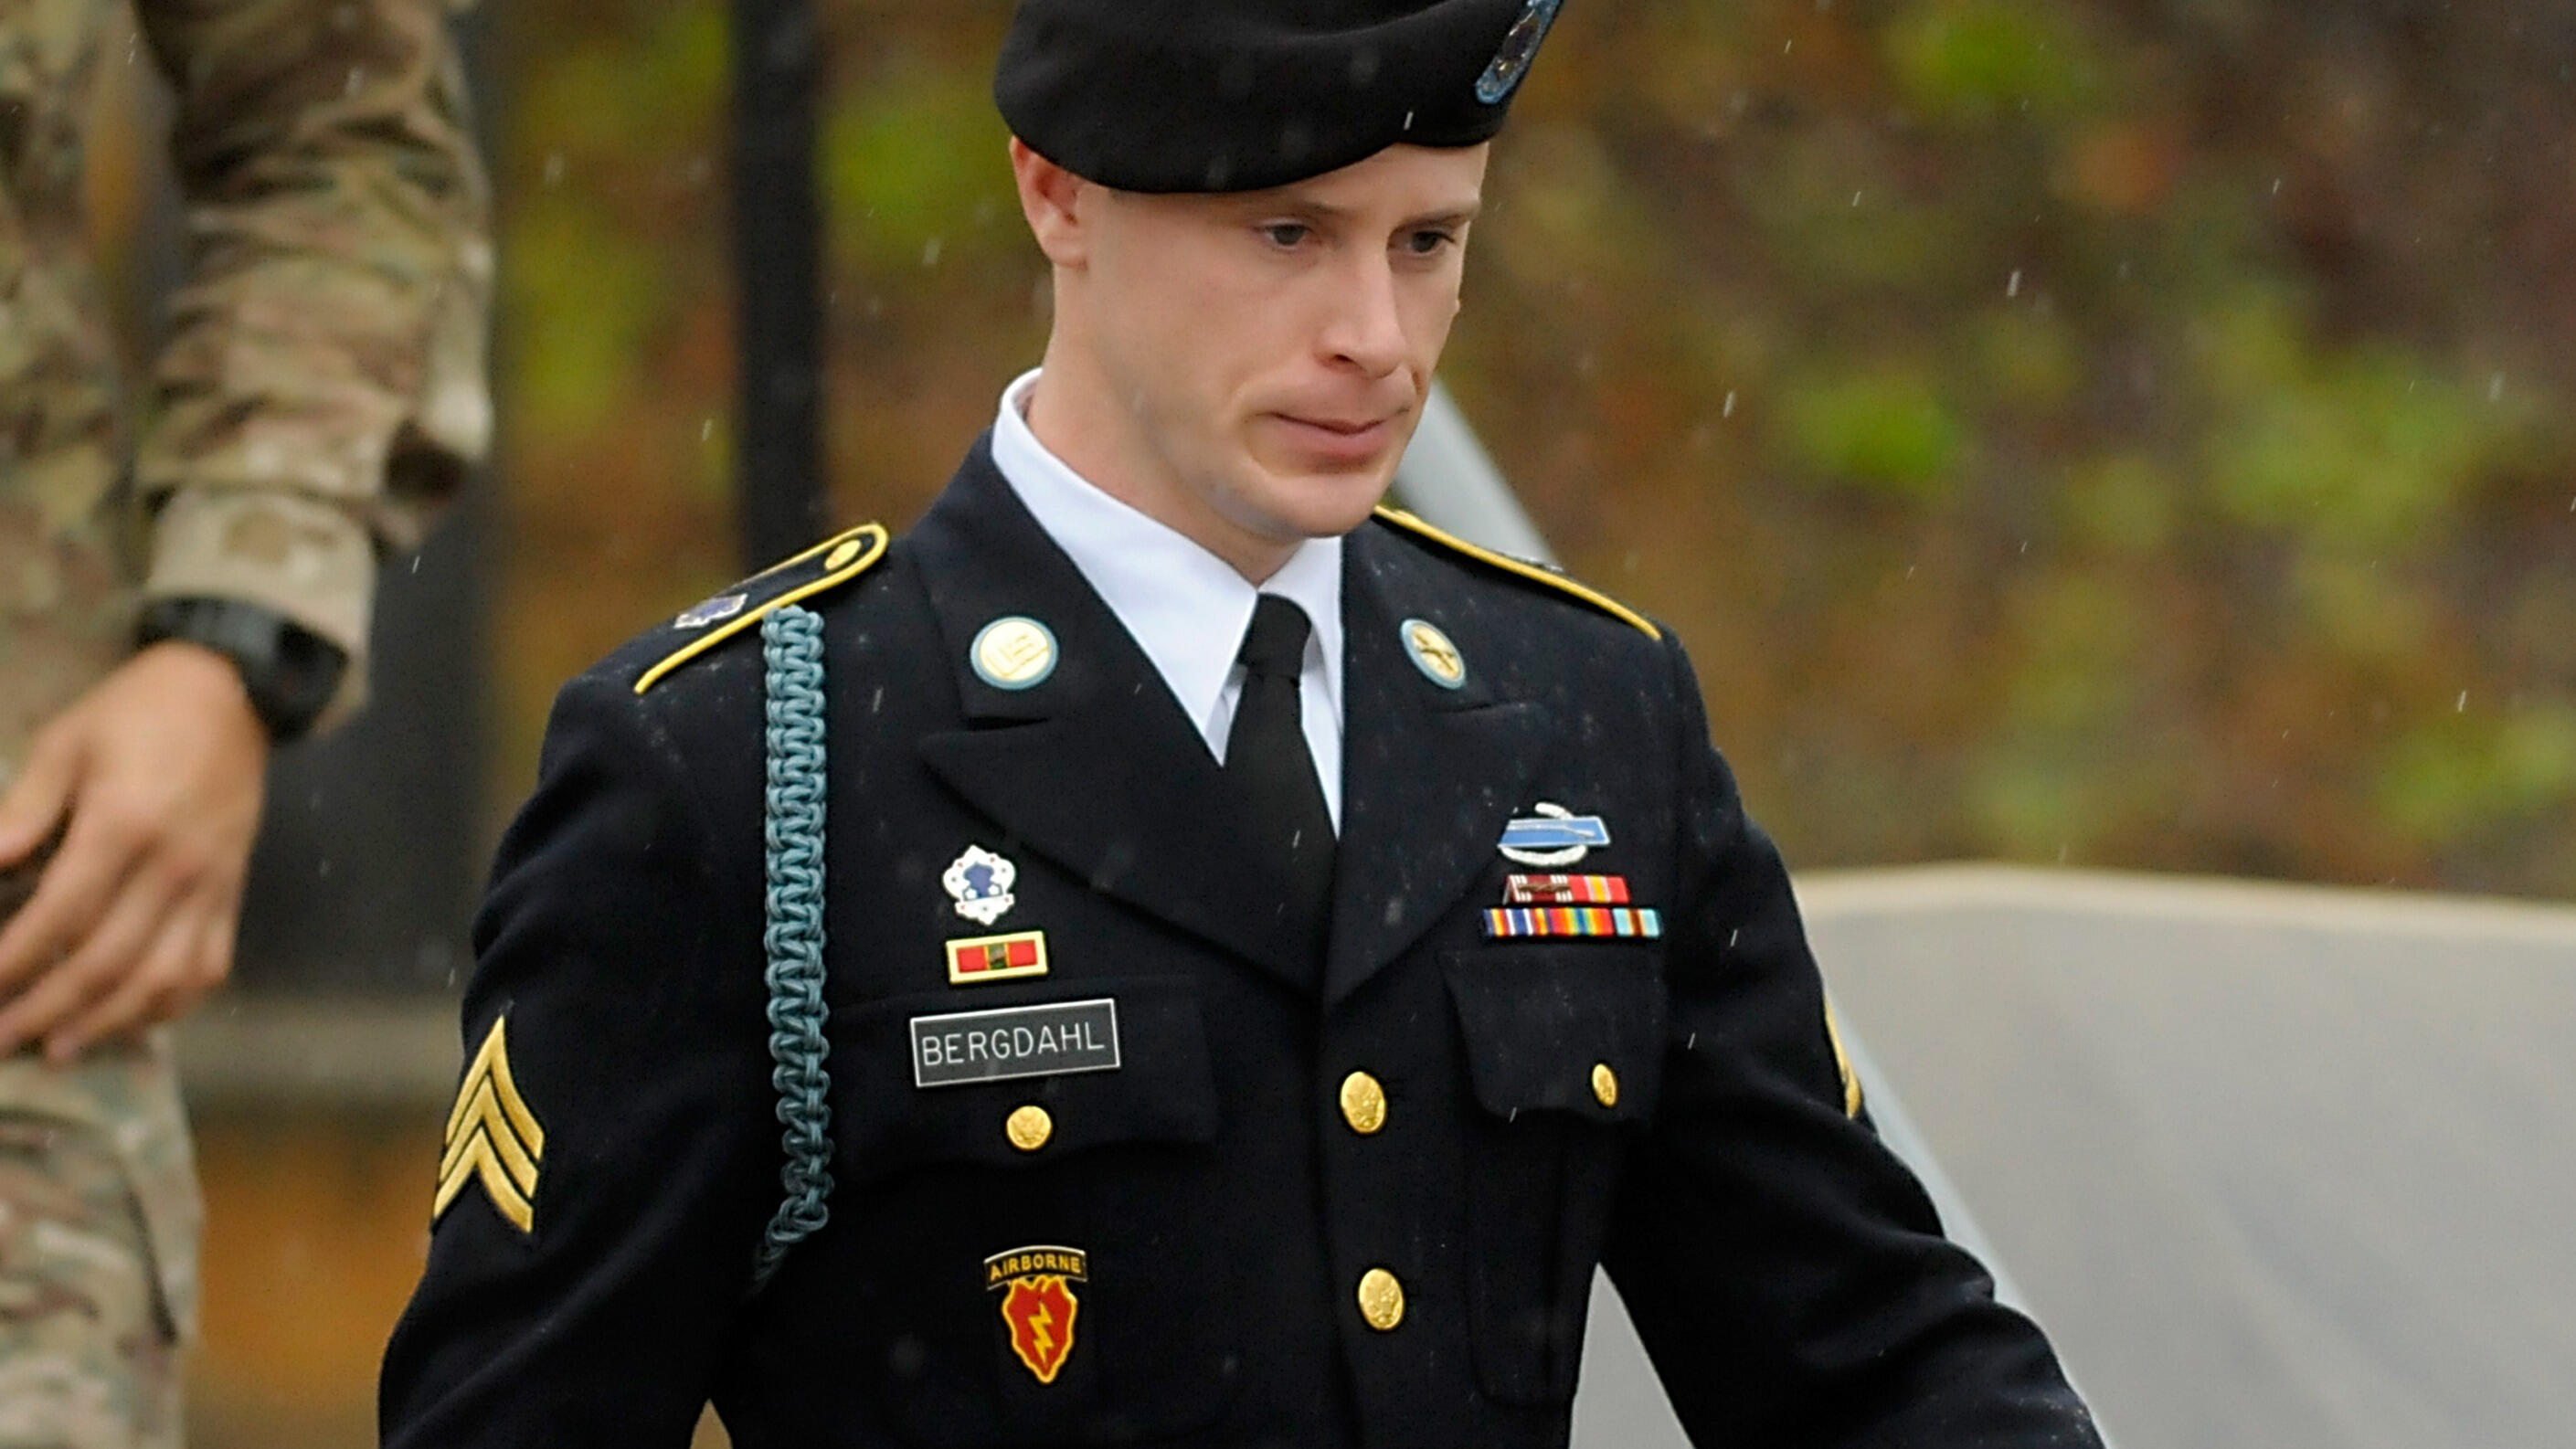 FT. BRAGG, NC - DECEMBER 22: Army Sgt. Bowe Bergdahl of Hailey, Idaho, leaves a military courthouse on December 22, 2015 in Ft. Bragg, North Carolina. Bergdahl was arraigned on charges of desertion and endangering troops stemming from his decision to leav